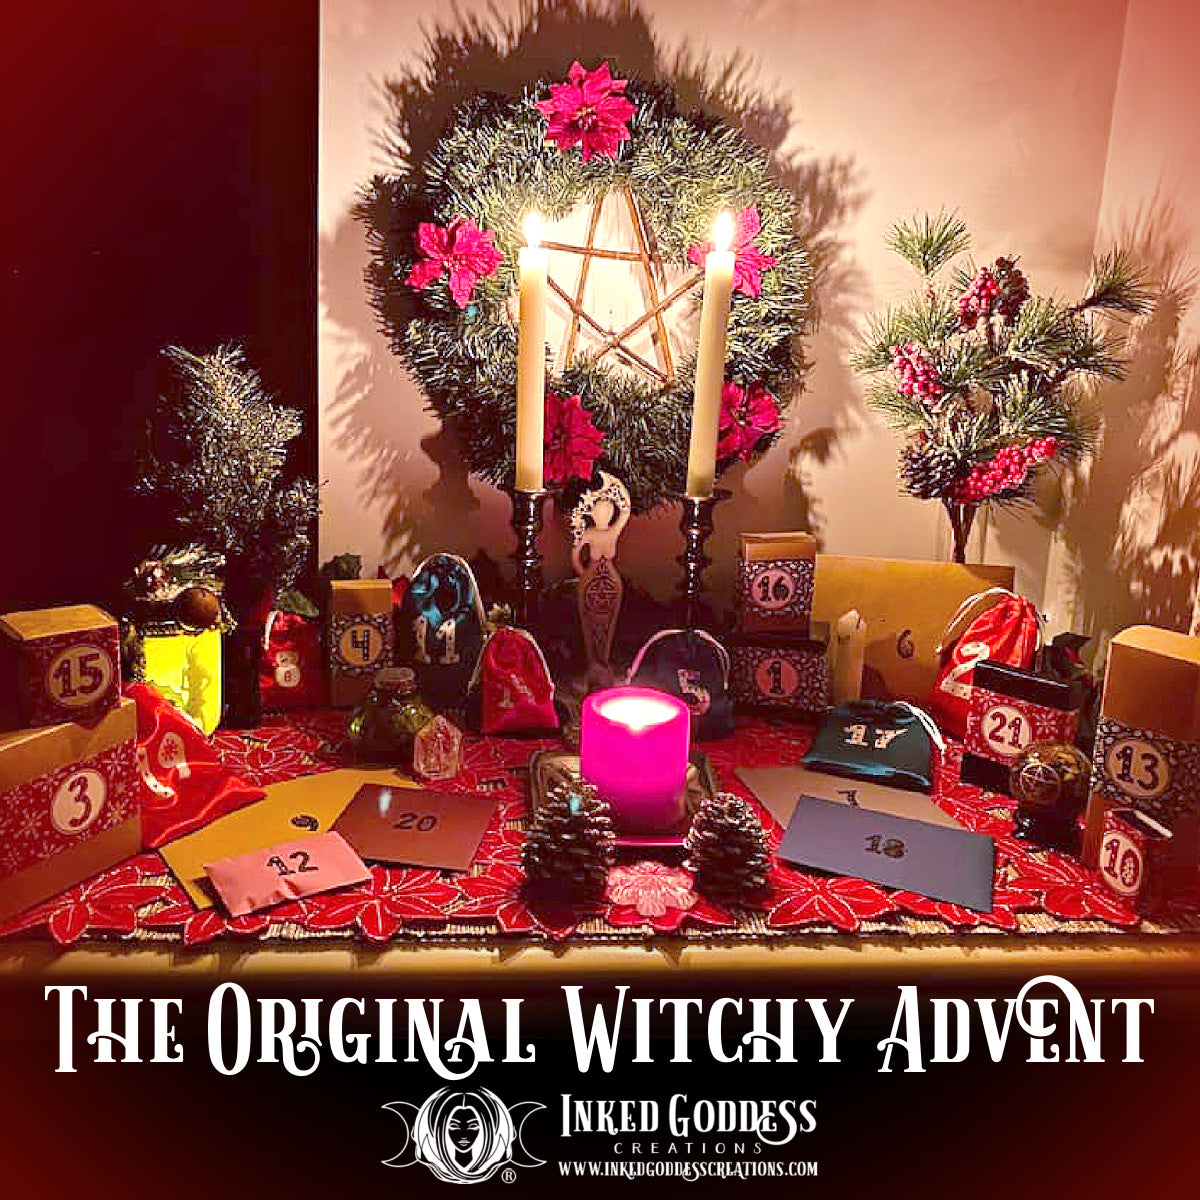 2023 Witchy Advent Calendar from Inked Goddess Creations